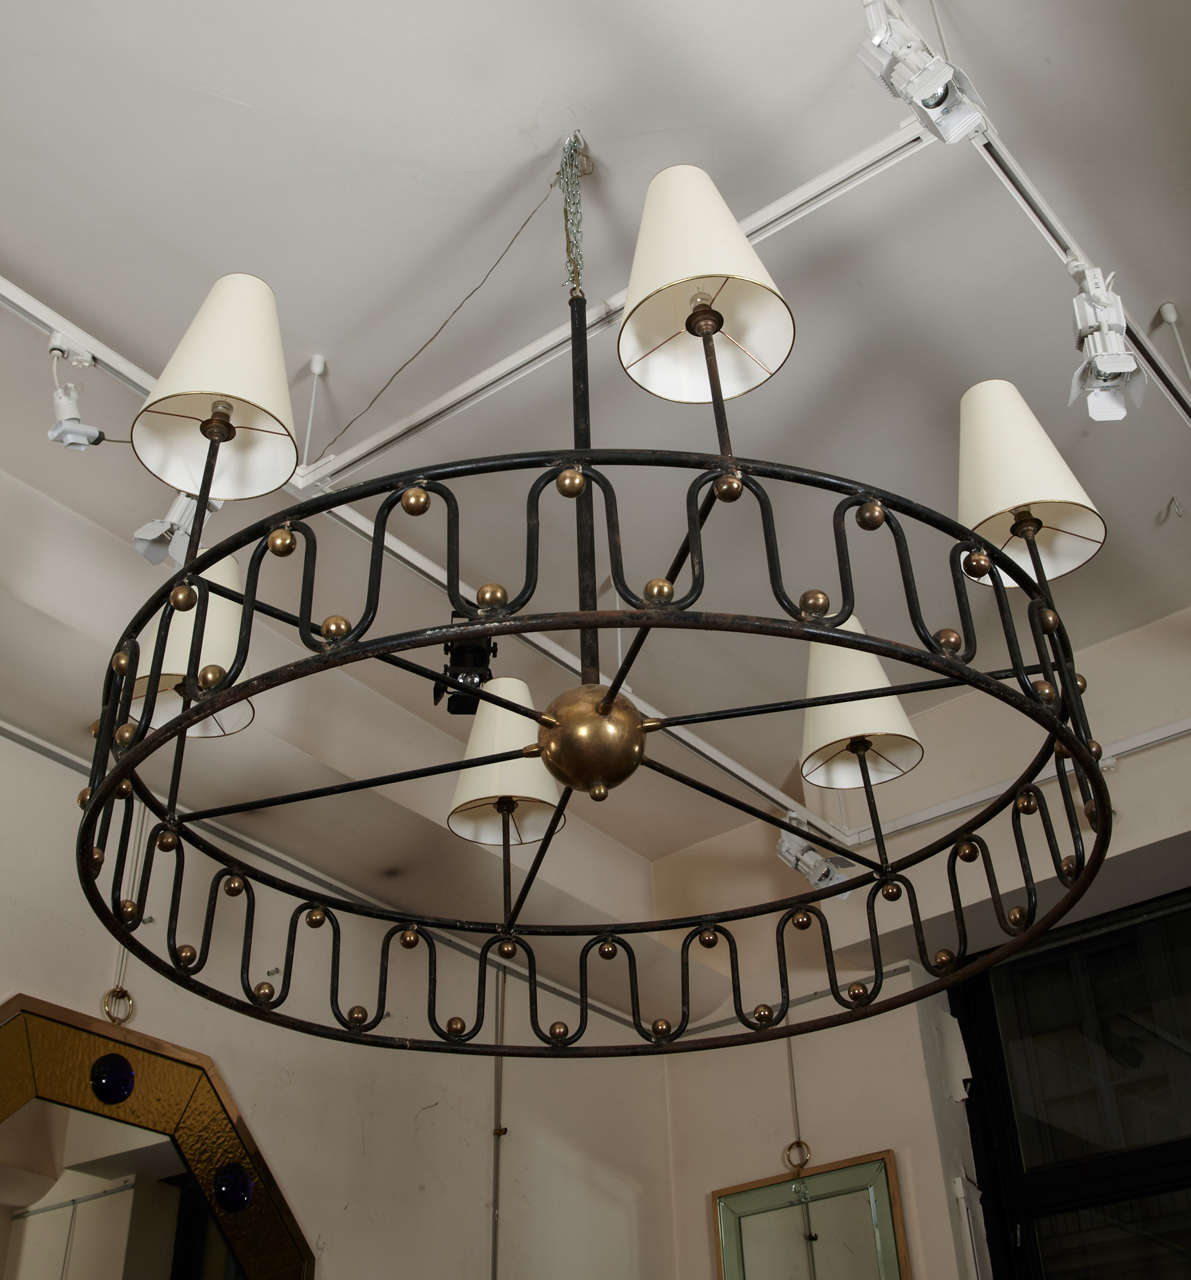 Jean Royère rarest huge model serpentine six-light chandelier in black painted wrought iron and brass balls.